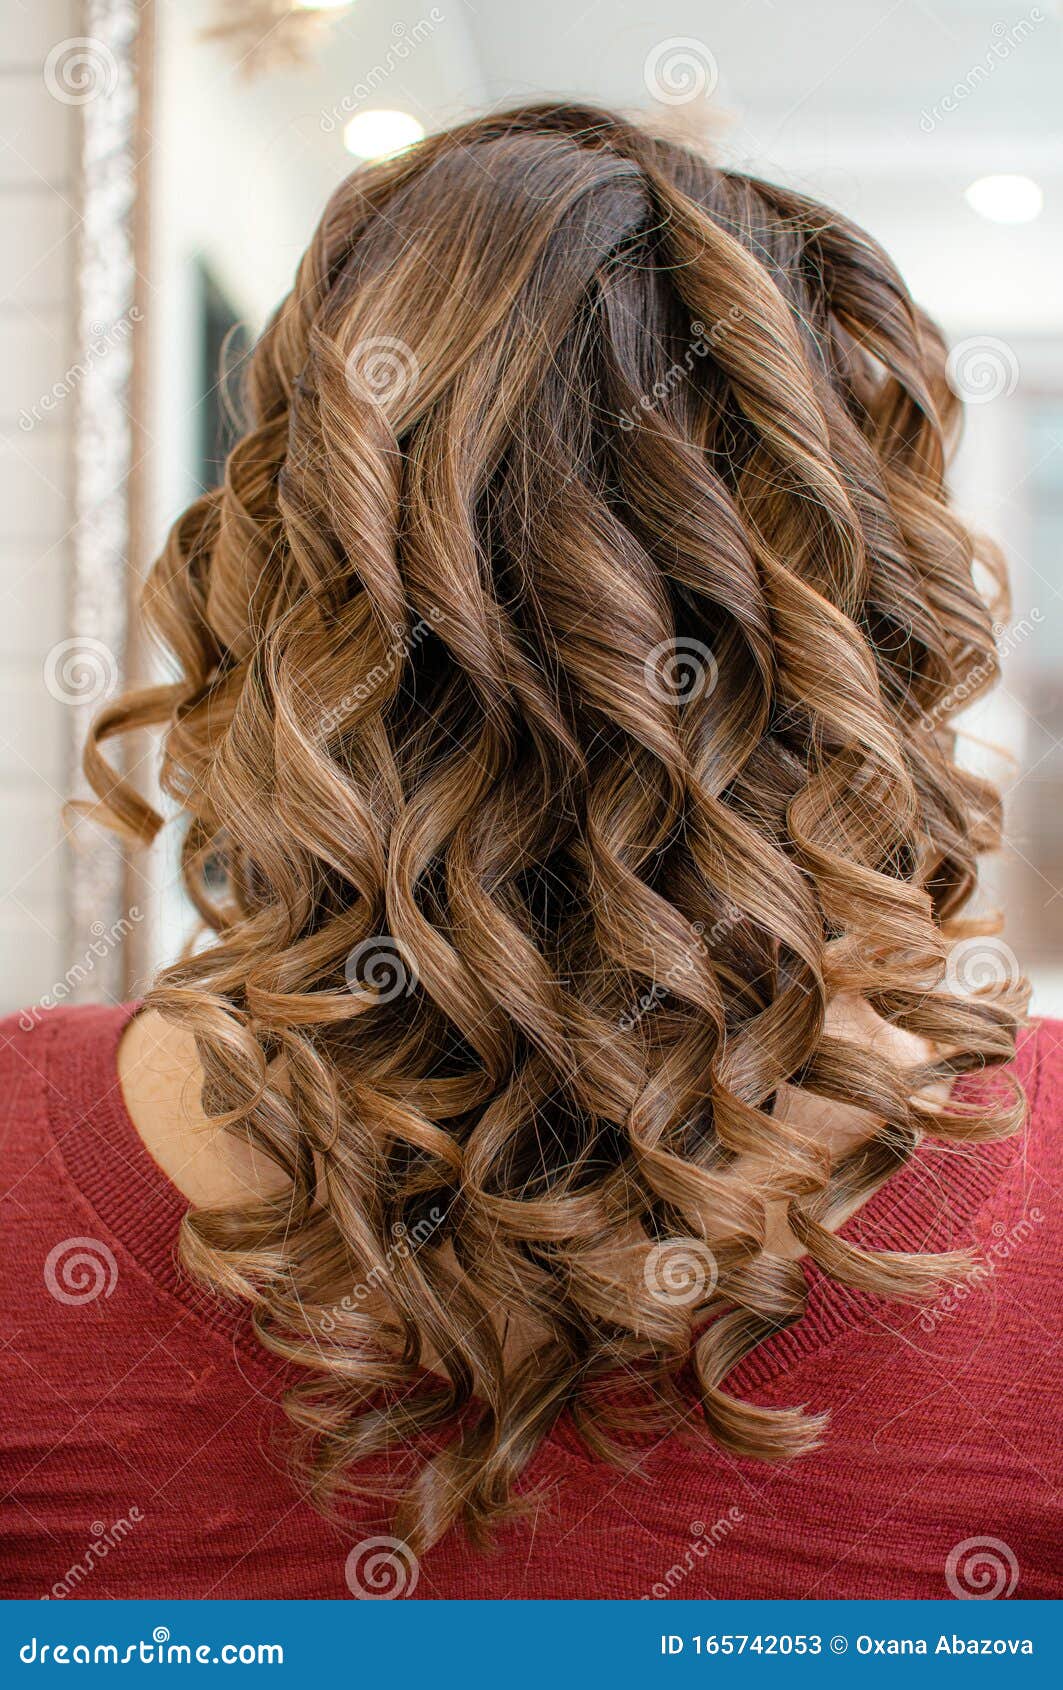 Process of Creating a Female Hairstyle on Long Hair Hollywood Wave View  from the Back Stock Image - Image of long, coloring: 165742053